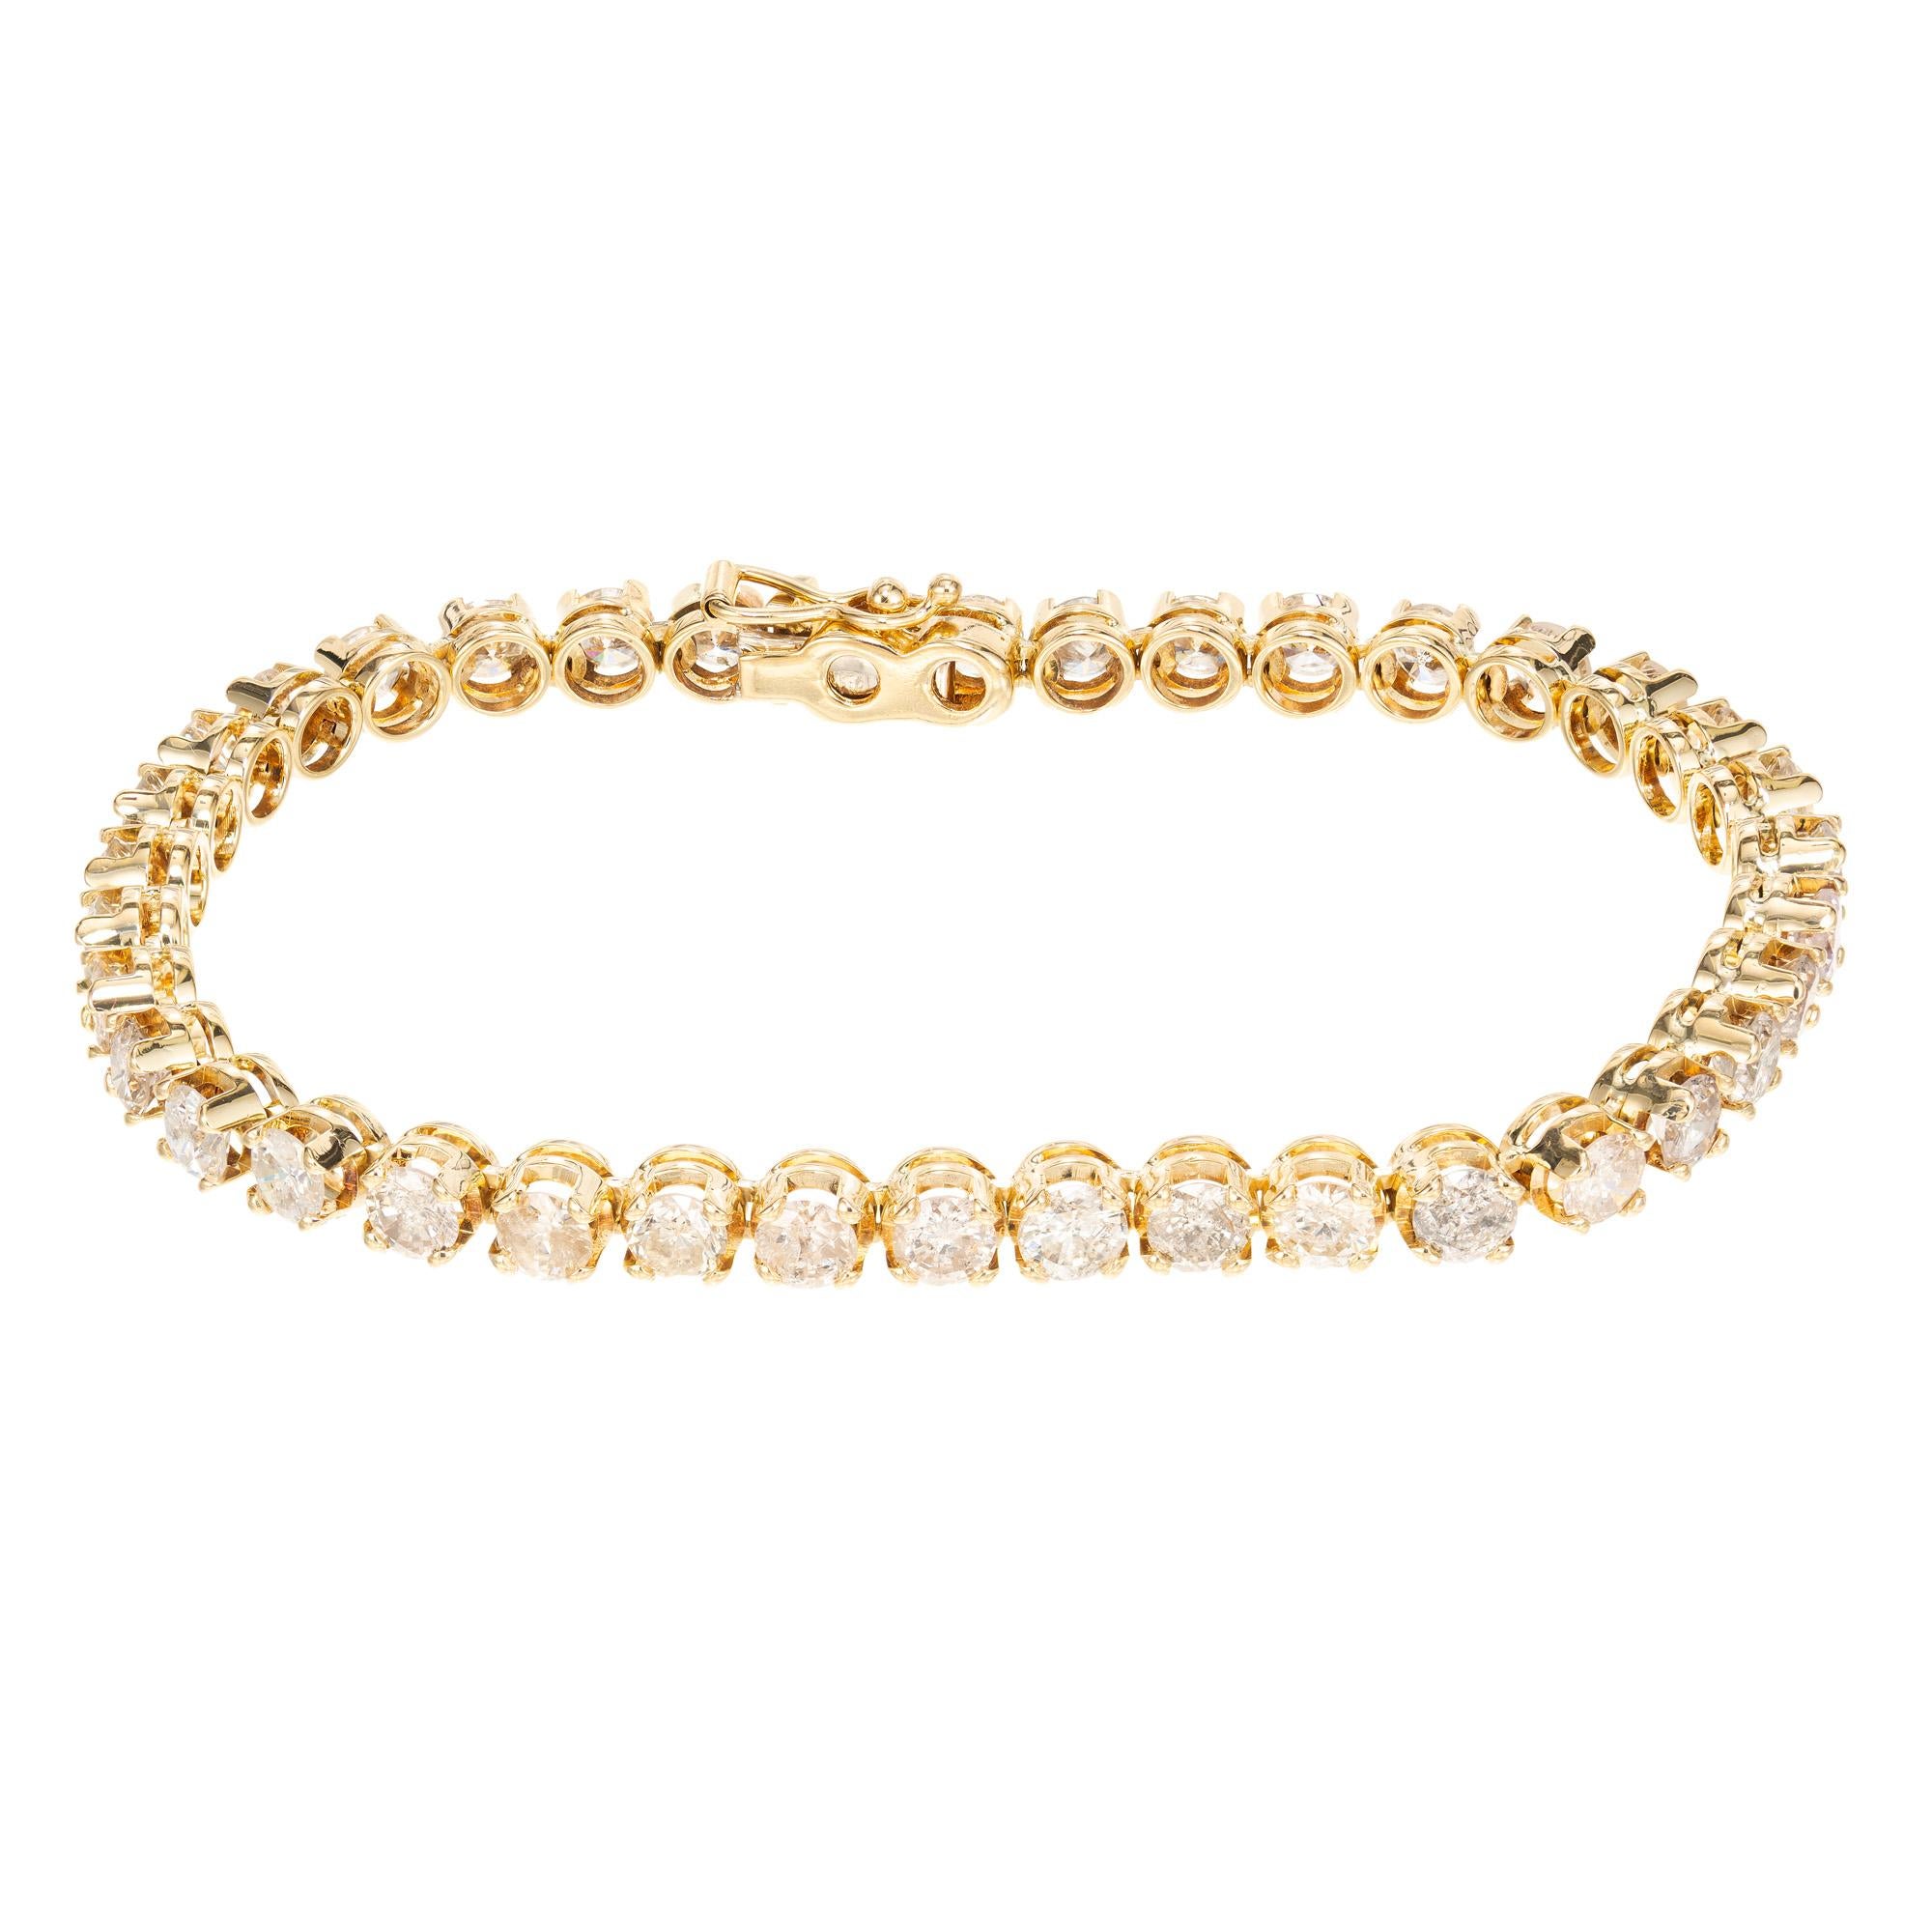 Diamond yellow gold tennis bracelet. This dazzling bracelets boats of 38 round cut diamonds with an approximate total carat weight of 6.00. and are meticulously set in radiant in 14k yellow gold. This bracelet measures 7 inches in length. It secured